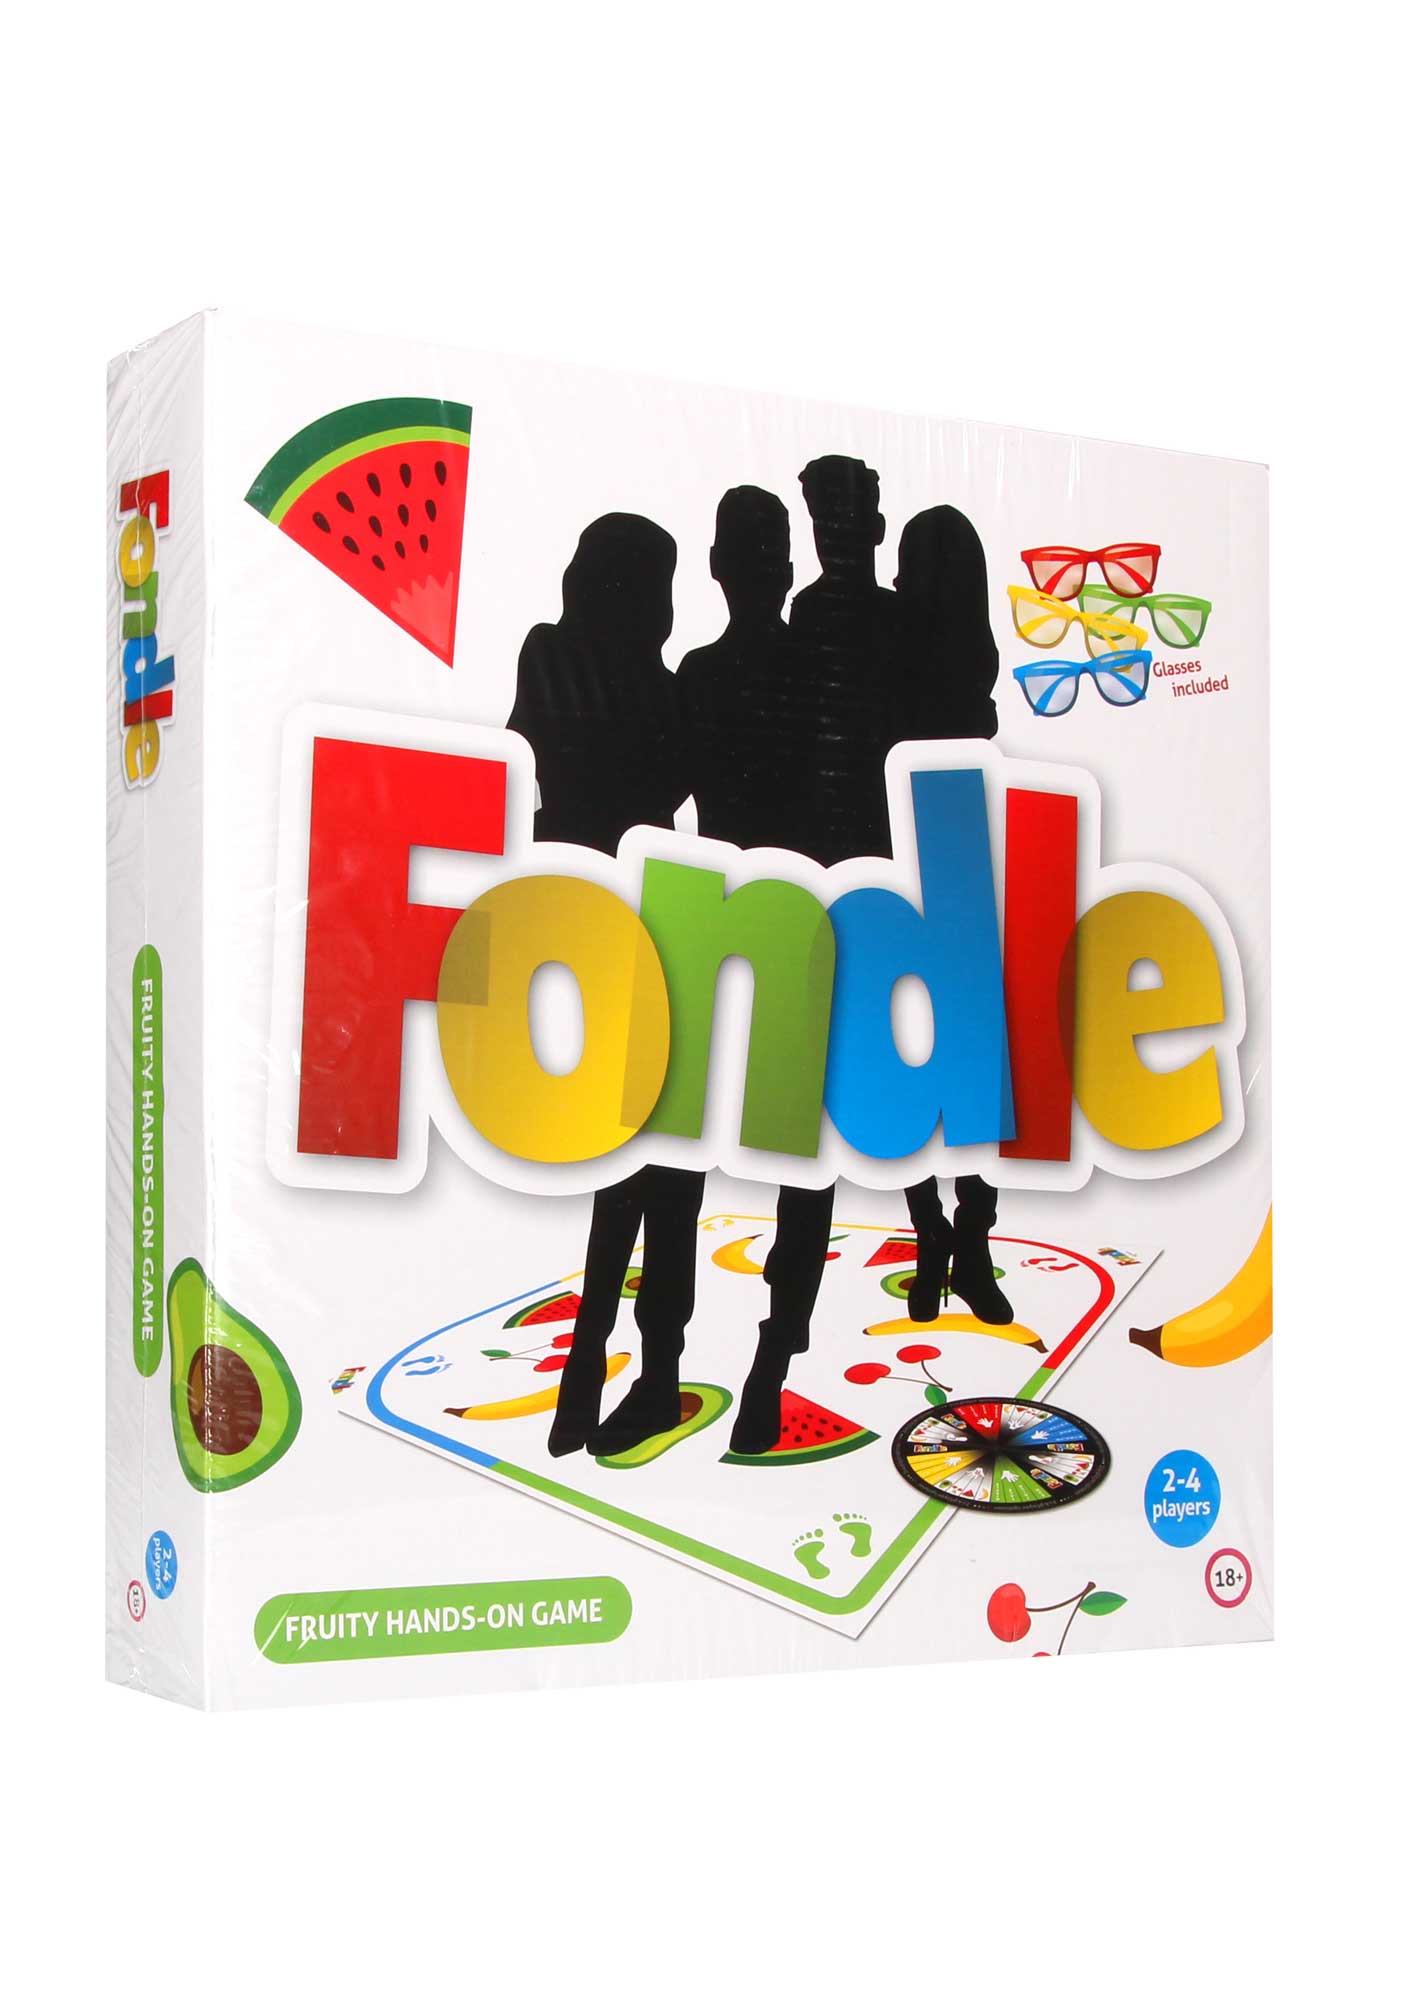 Fondle - Funny Party Game for Adults SH-PWMFON1